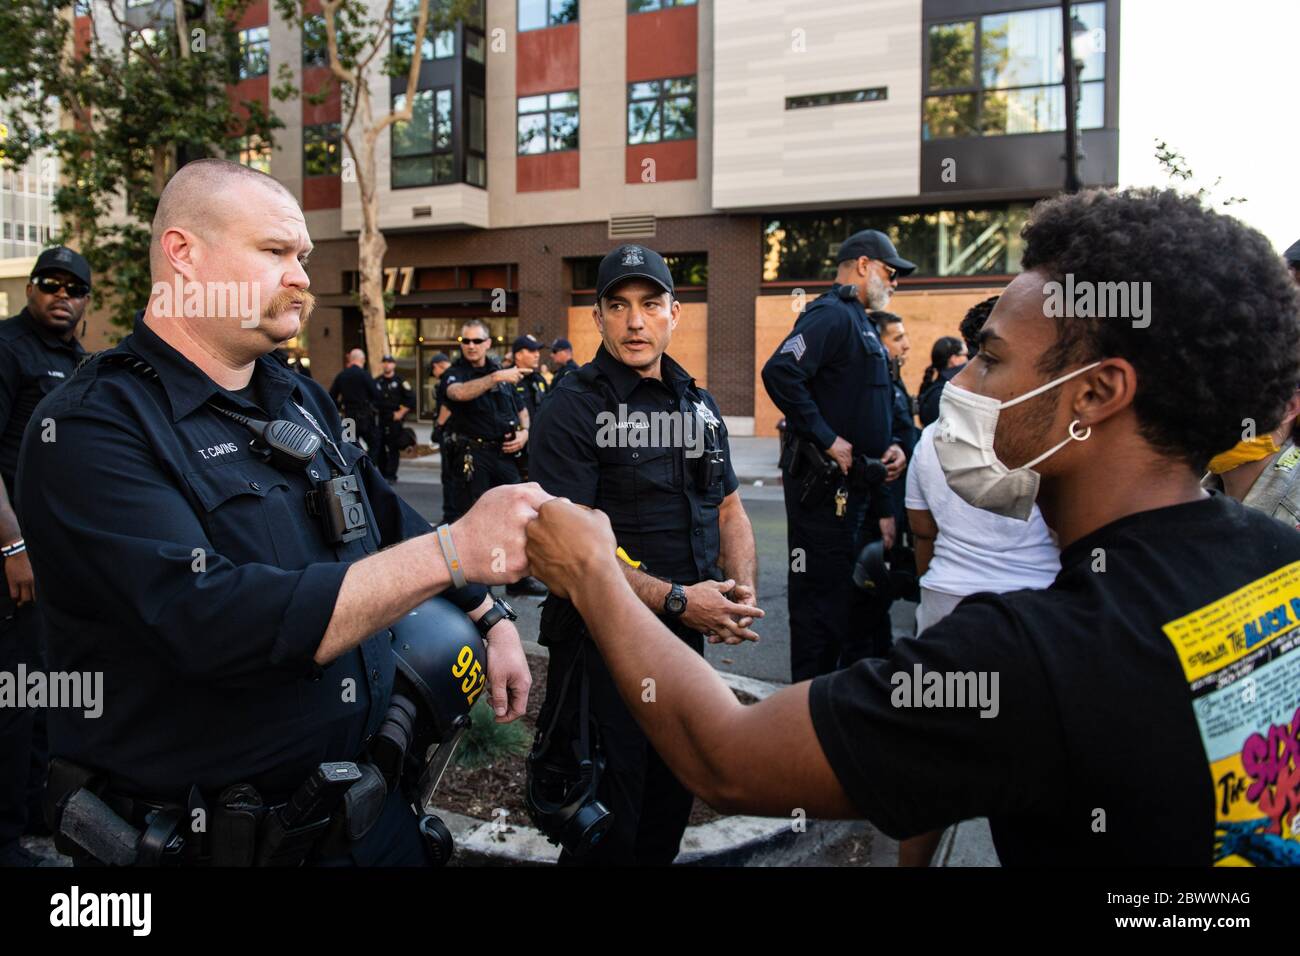 Oakland, Ca. 2nd June, 2020. An Oakland Police Officer and protestor share a fist bump in solidarity near the Oakland Police Department in Oakland, California on June 2, 2020 after the death of George Floyd. Credit: Chris Tuite/Image Space/Media Punch/Alamy Live News Stock Photo